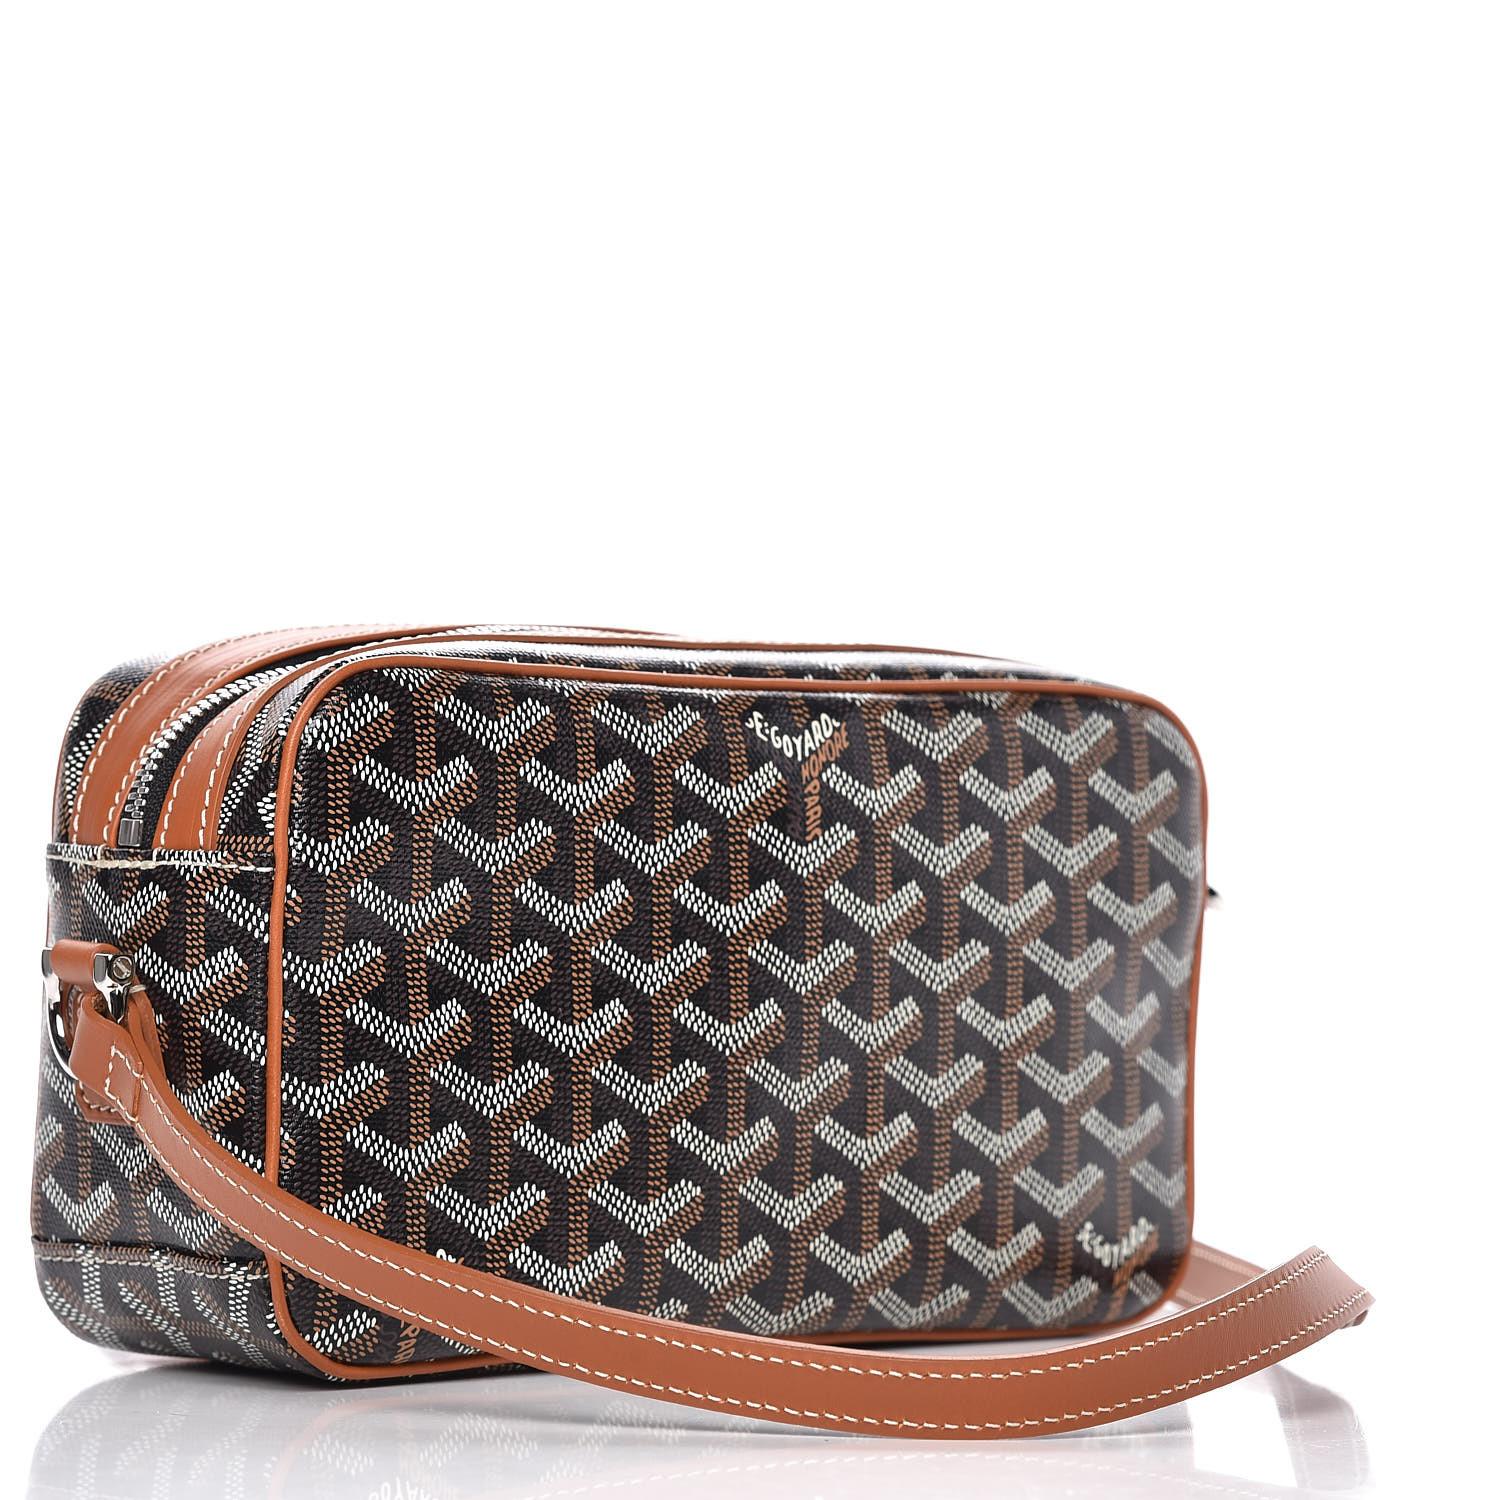 Goyard Crossbody Bag Price - How do you Price a Switches?